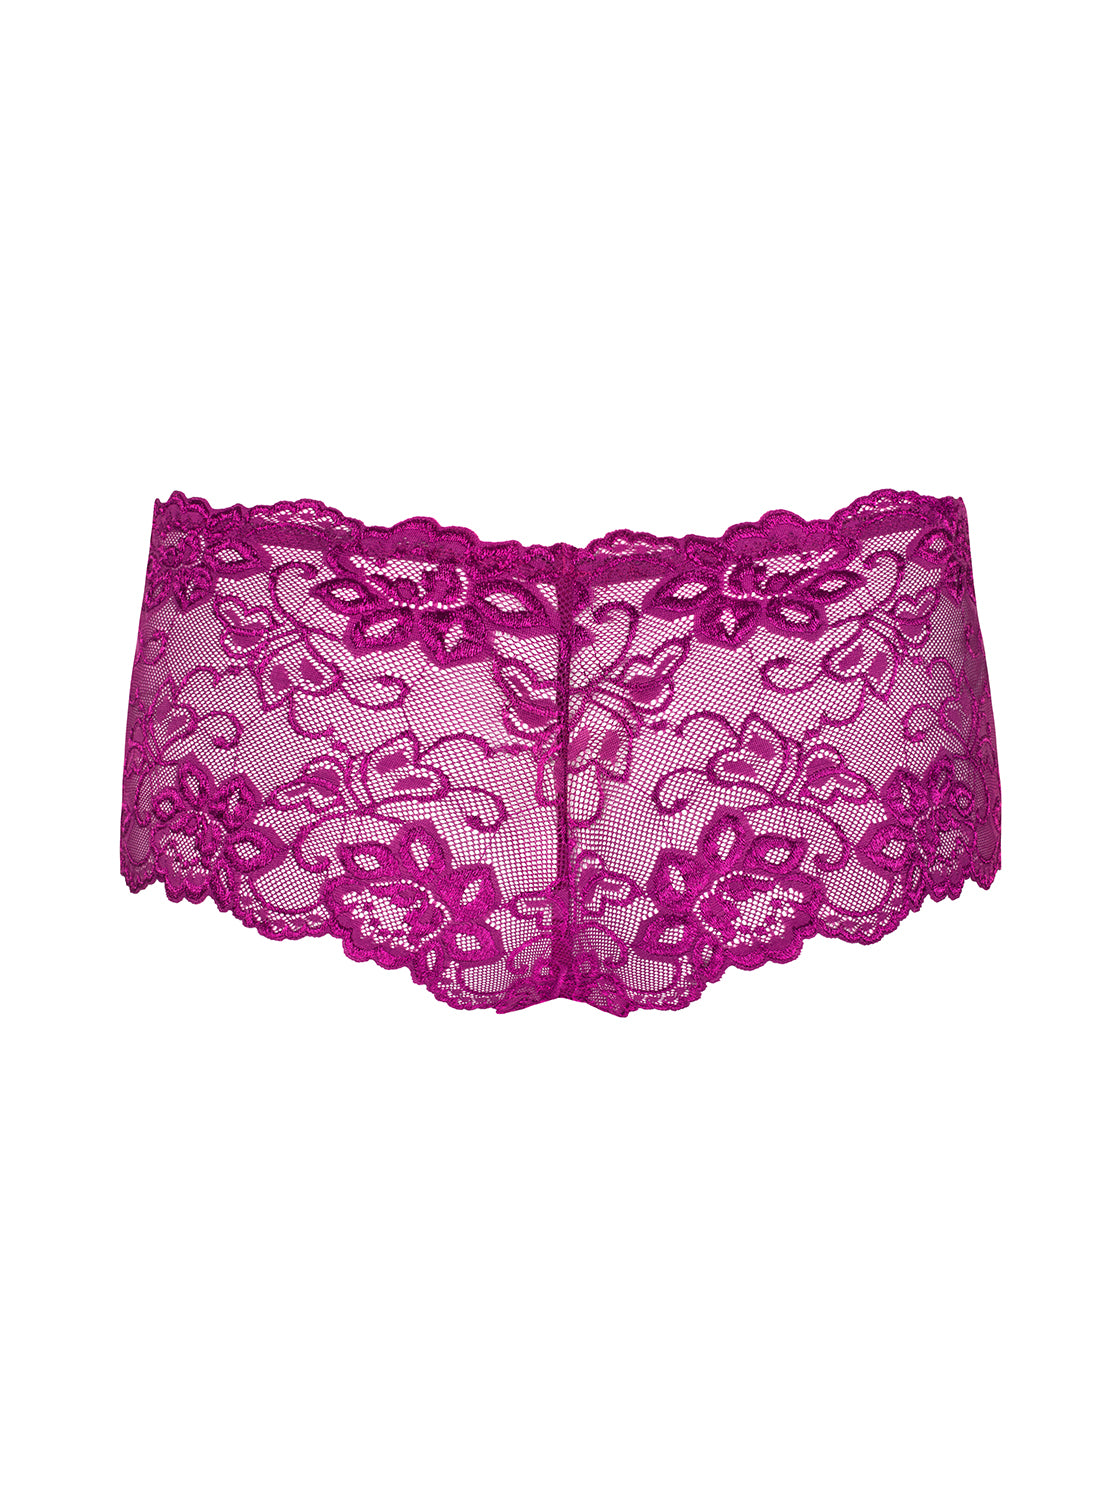 Idillia a seductive purple shorties made of elastic lace with floral motif